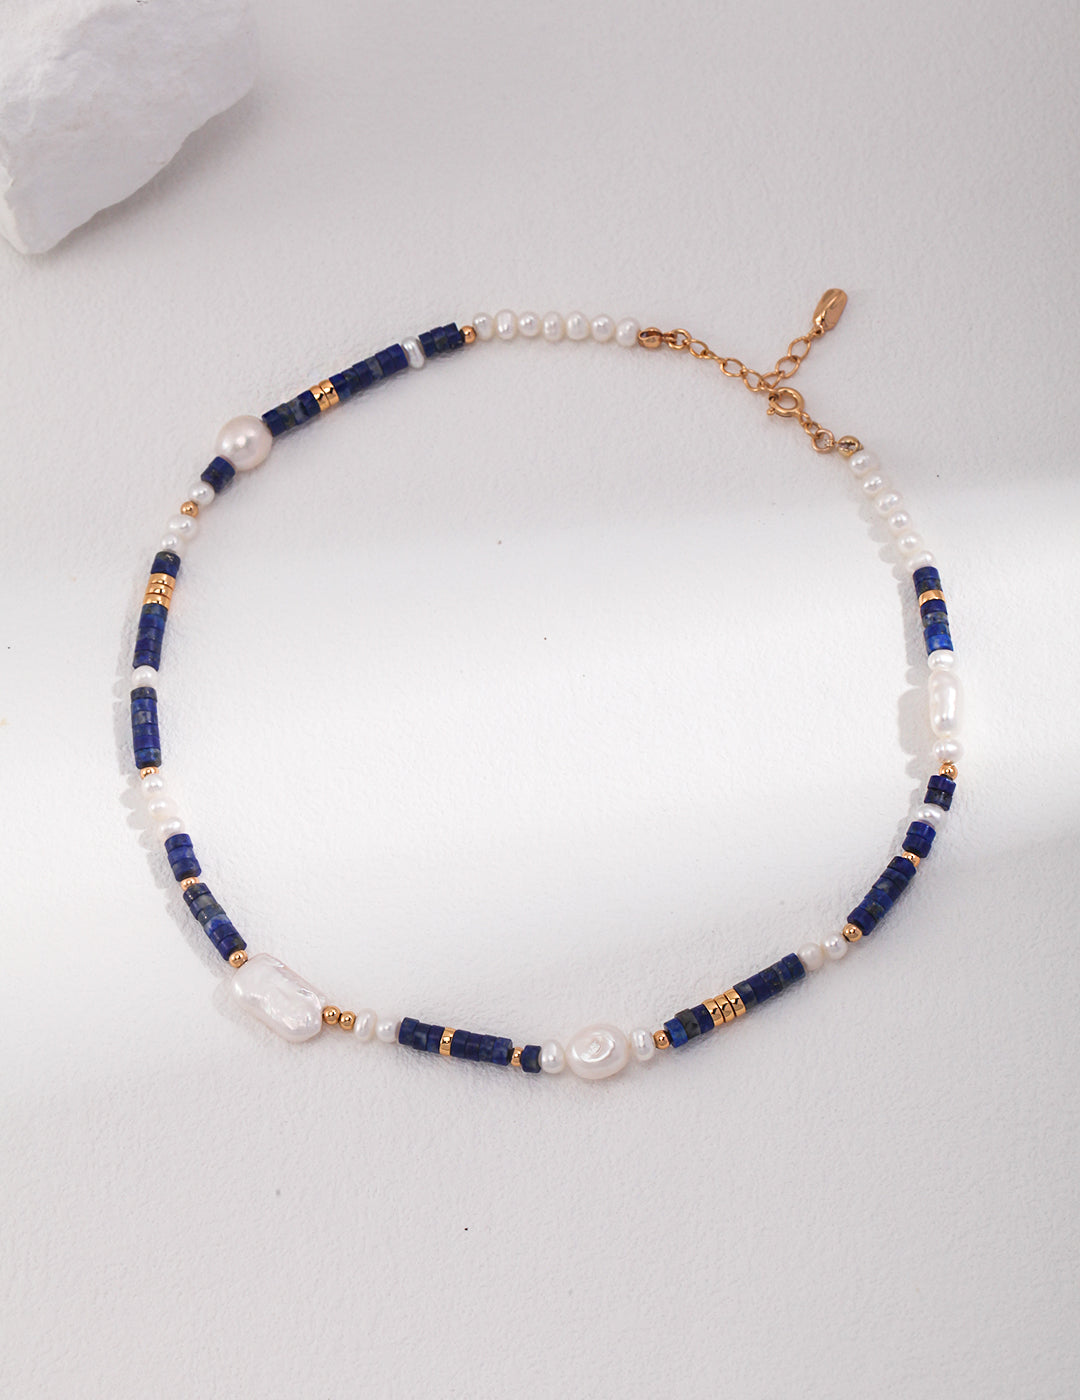 Blue Dongling jade and pearls Necklace